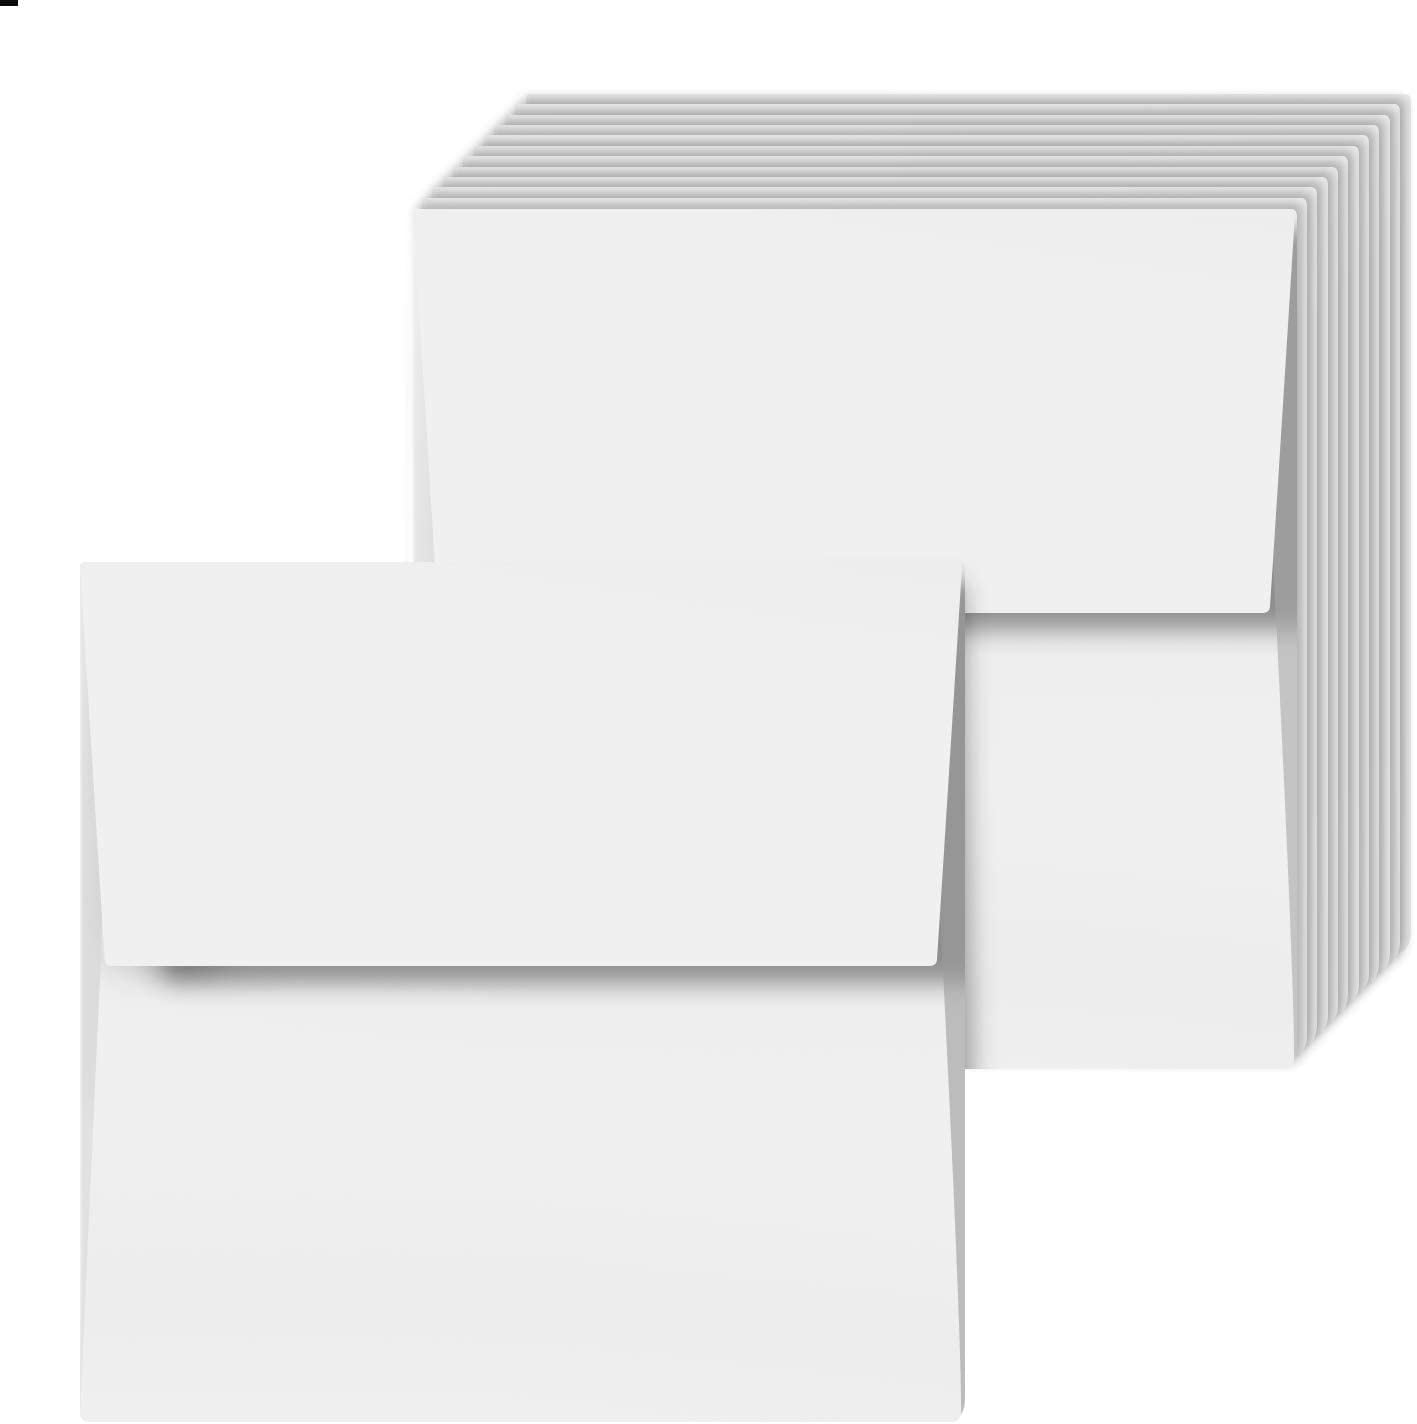 BagDream A9 Blank Invitation Envelopes 5 3/4 x 8 3/4 White Envelopes with  Peel & Seal Closure for Invitations, Photos, Baby Shower, Announcements,  Mailing, Pack of 100 